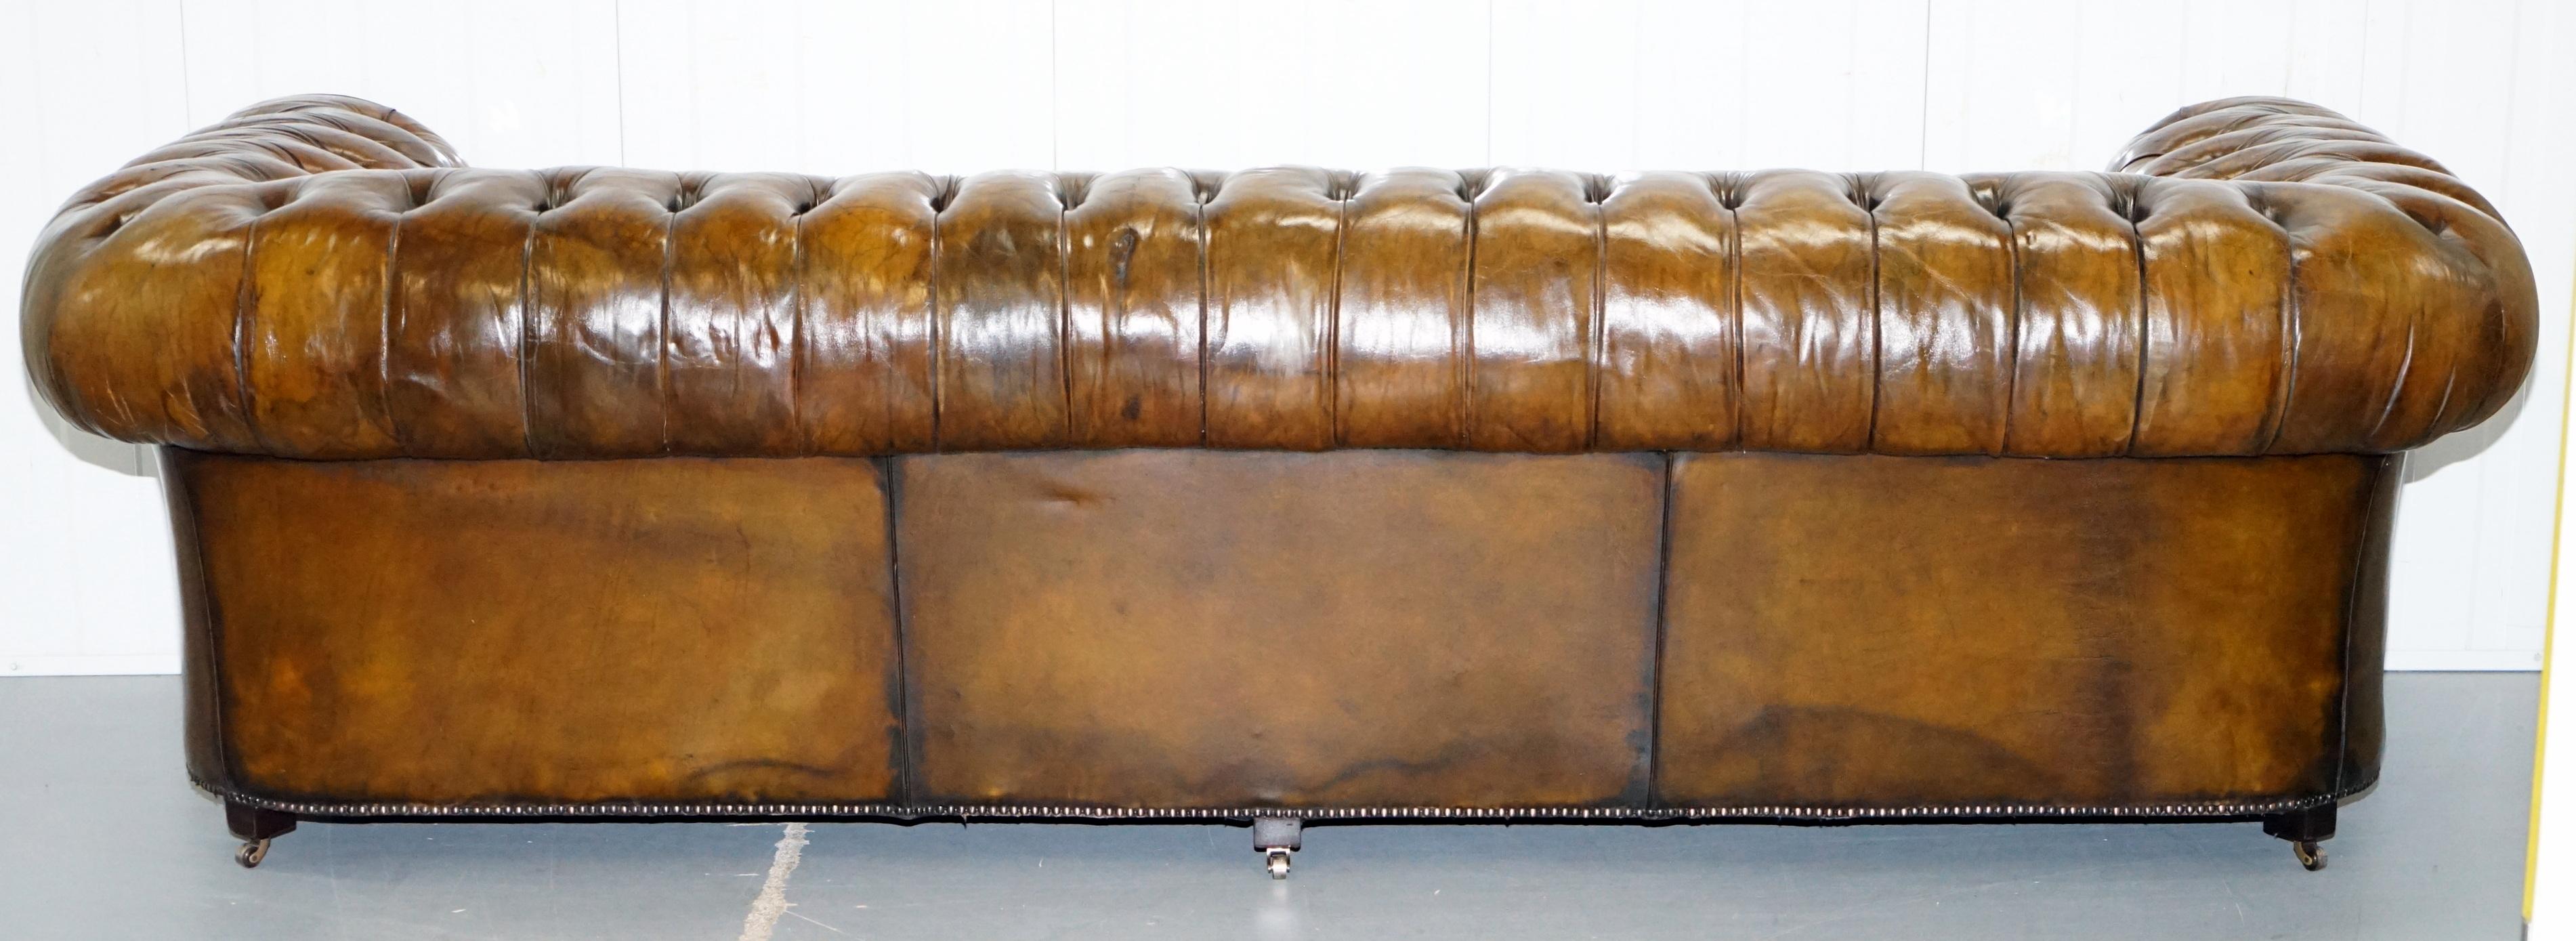 Huge Rare Victorian Horse Hair Fully Restored Brown Leather Chesterfield Sofa 11